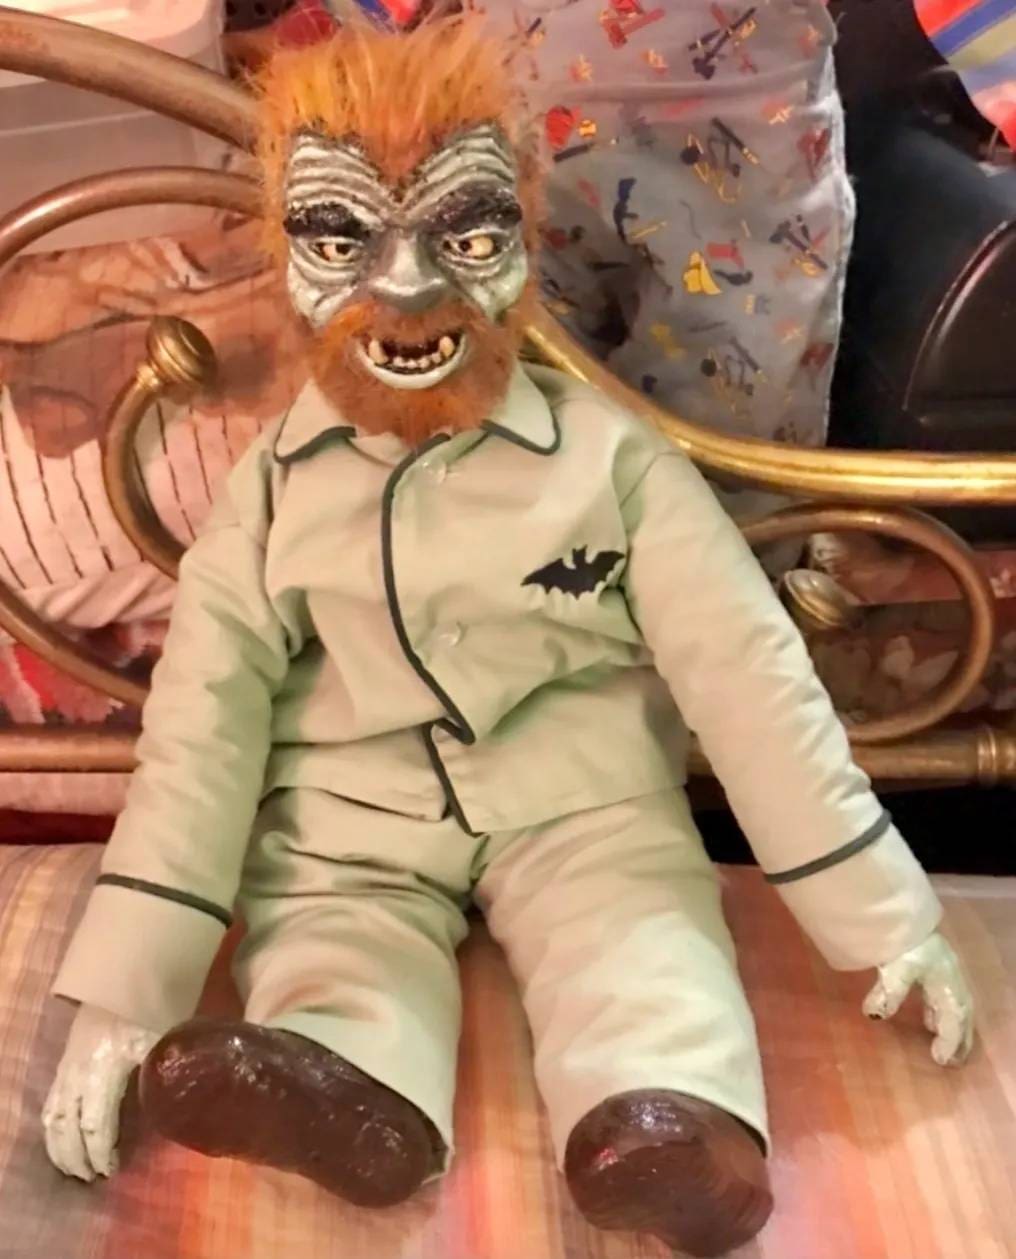 A doll of the werewolf is sitting on a chair.